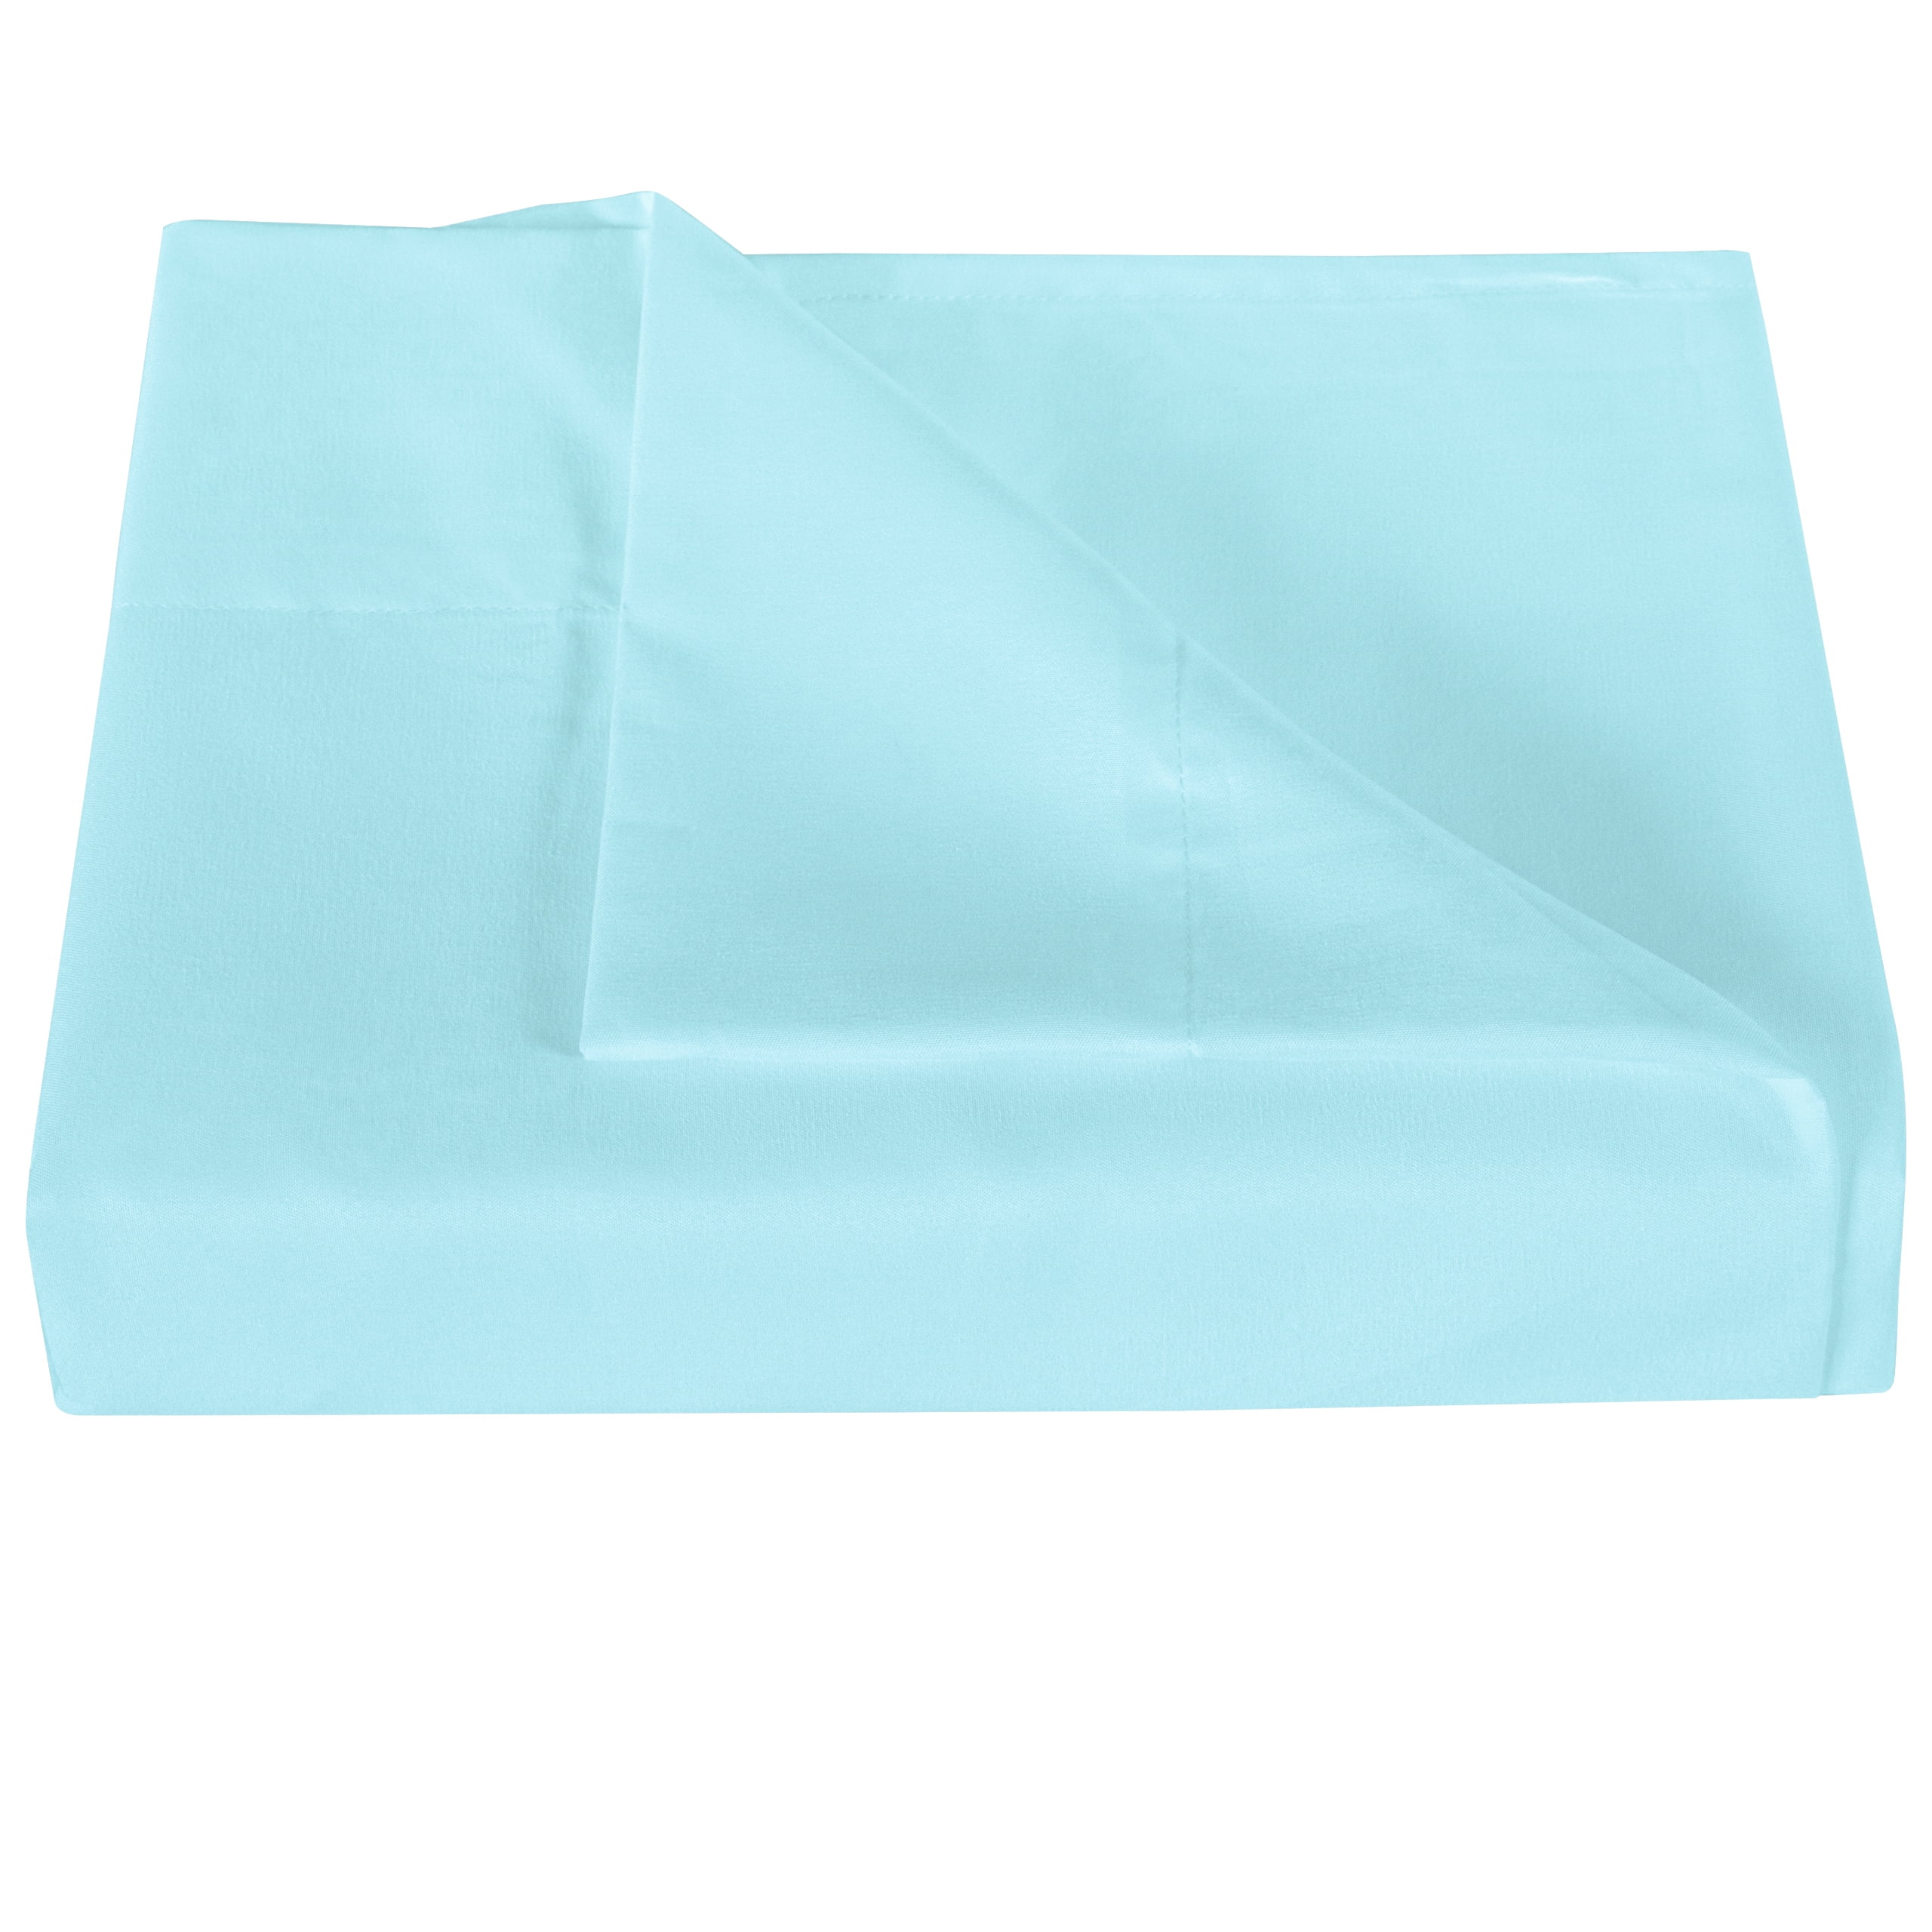 NTBAY Microfiber California King Bedding Flat Sheet Sky Blue Stain Resistant Top Sheet Fade Ultra Soft and Wrinkle